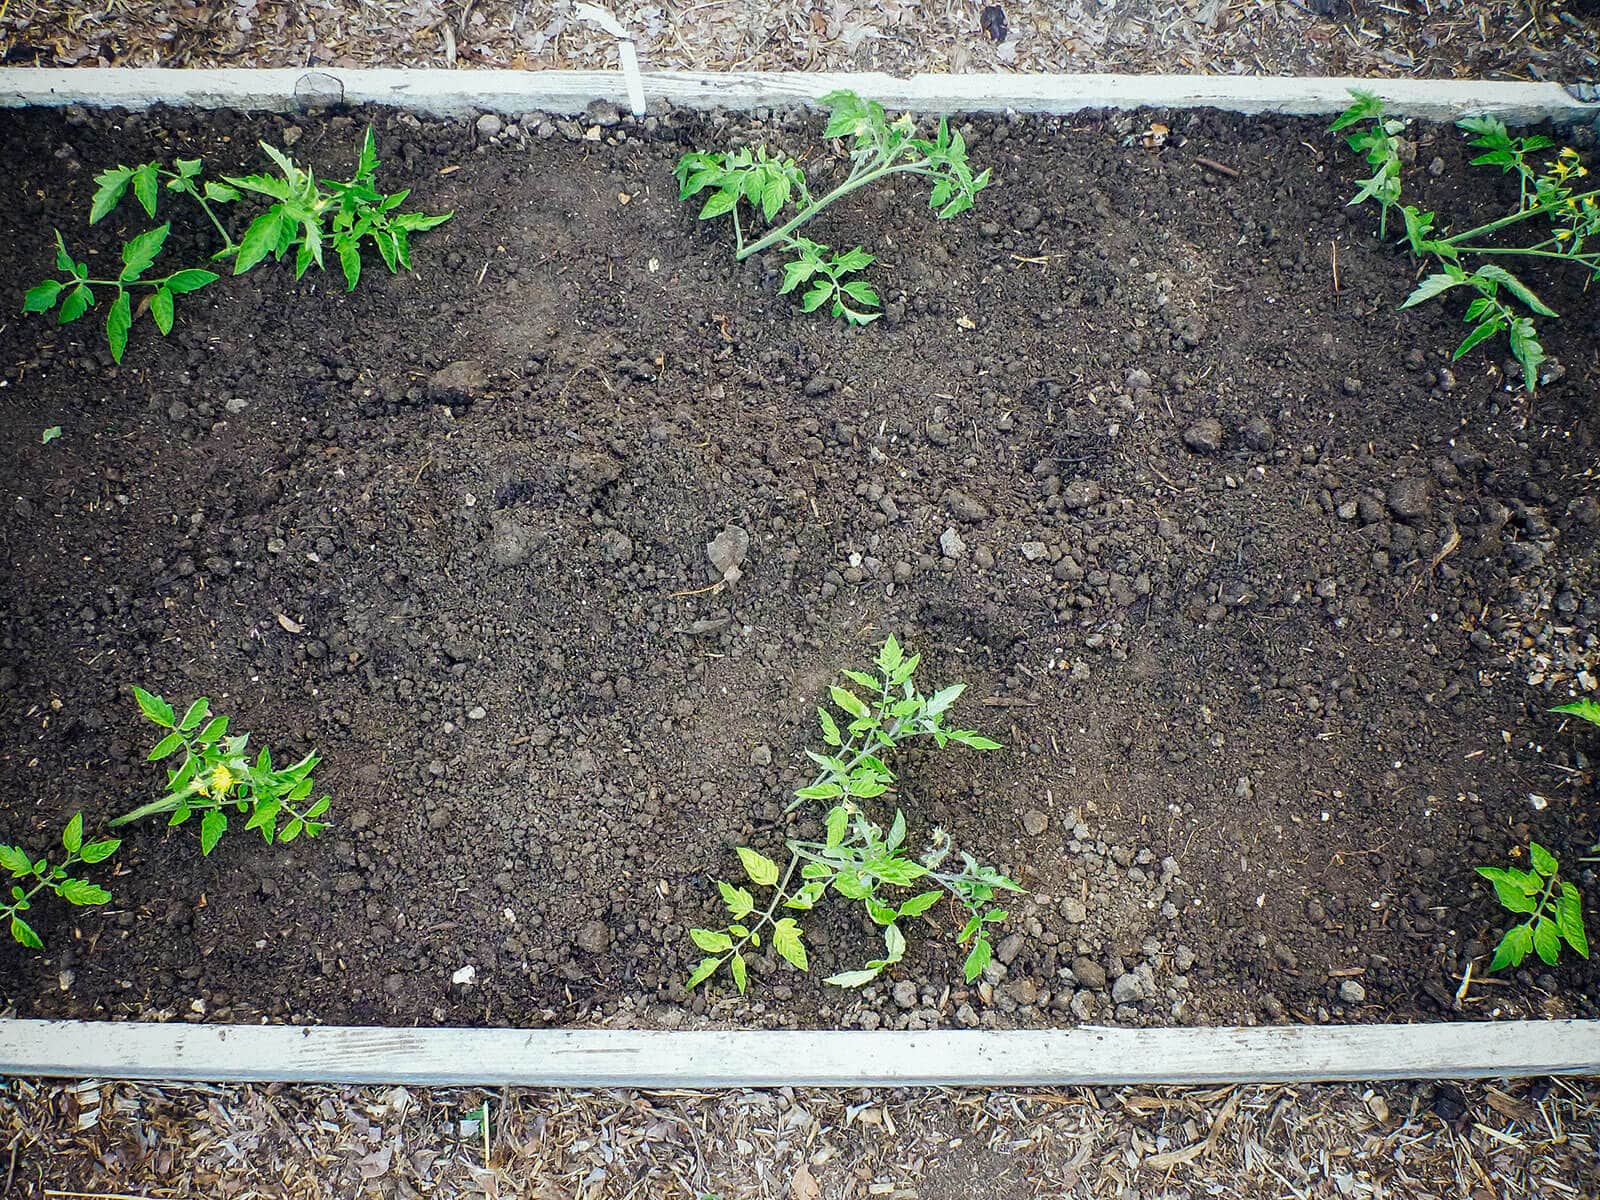 Tomato plants transplanted in trenches (troughs)